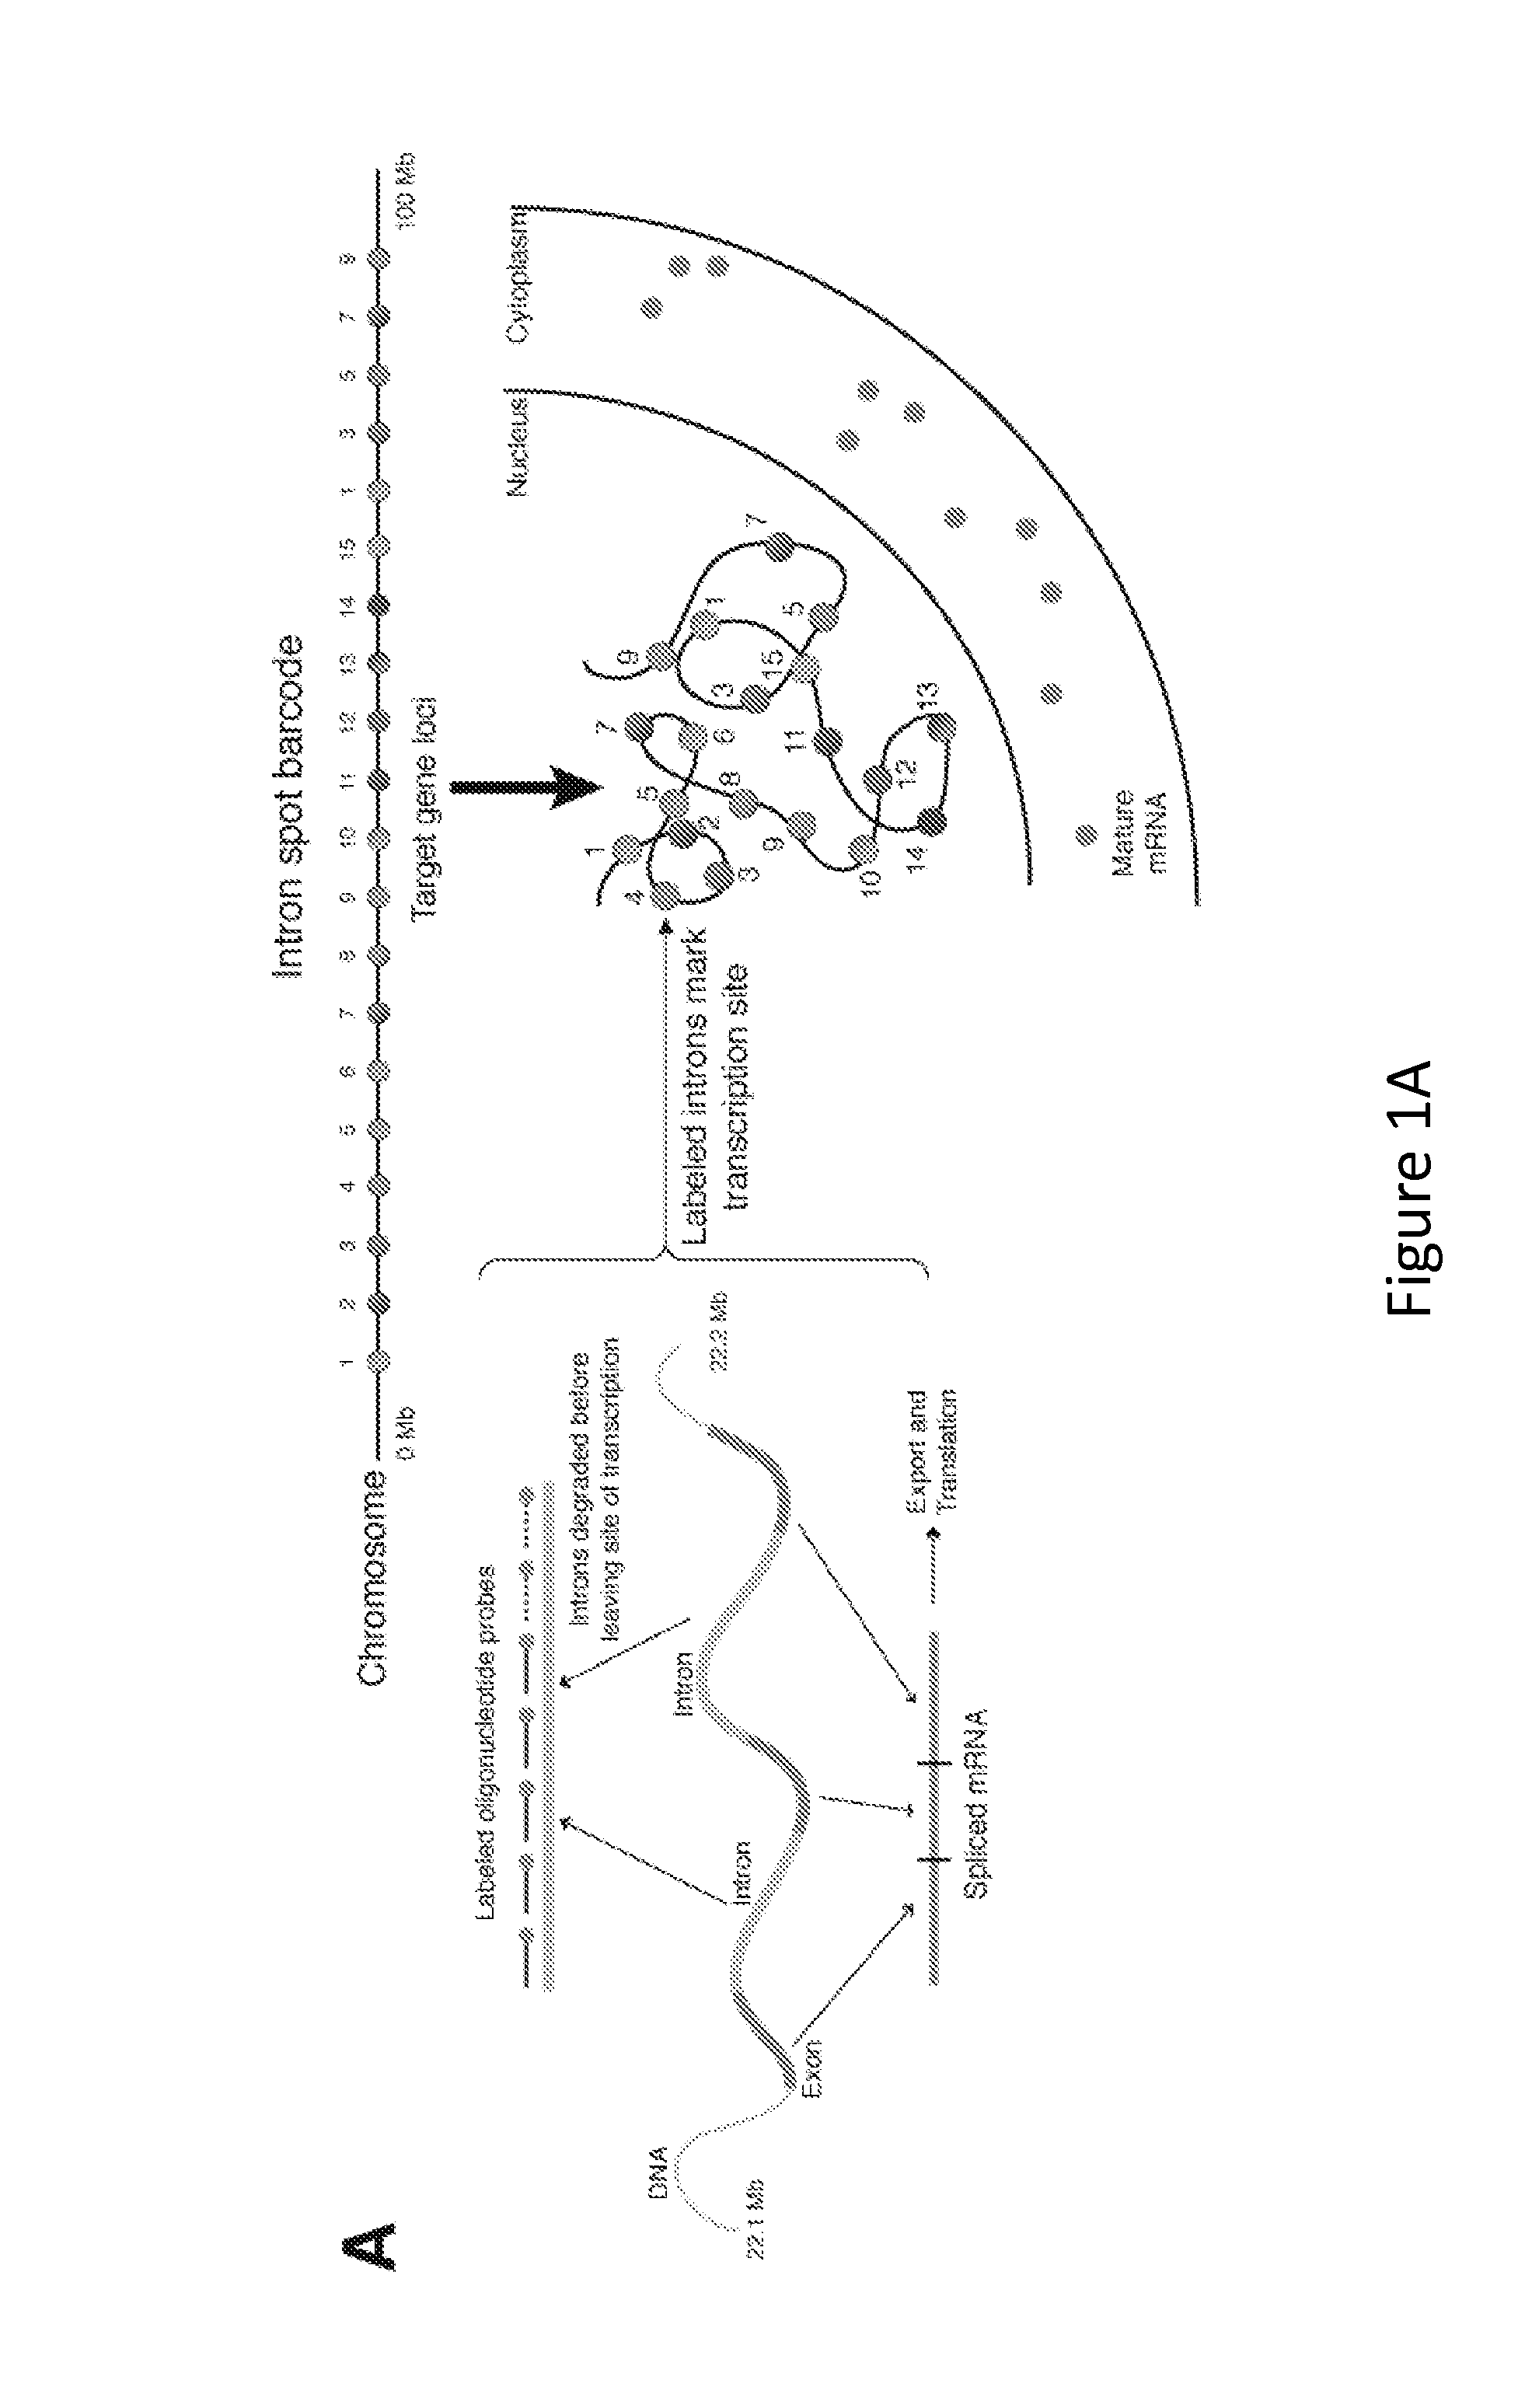 Method for Detecting Chromosome Structure and Gene Expression Simultaneously in Single Cells